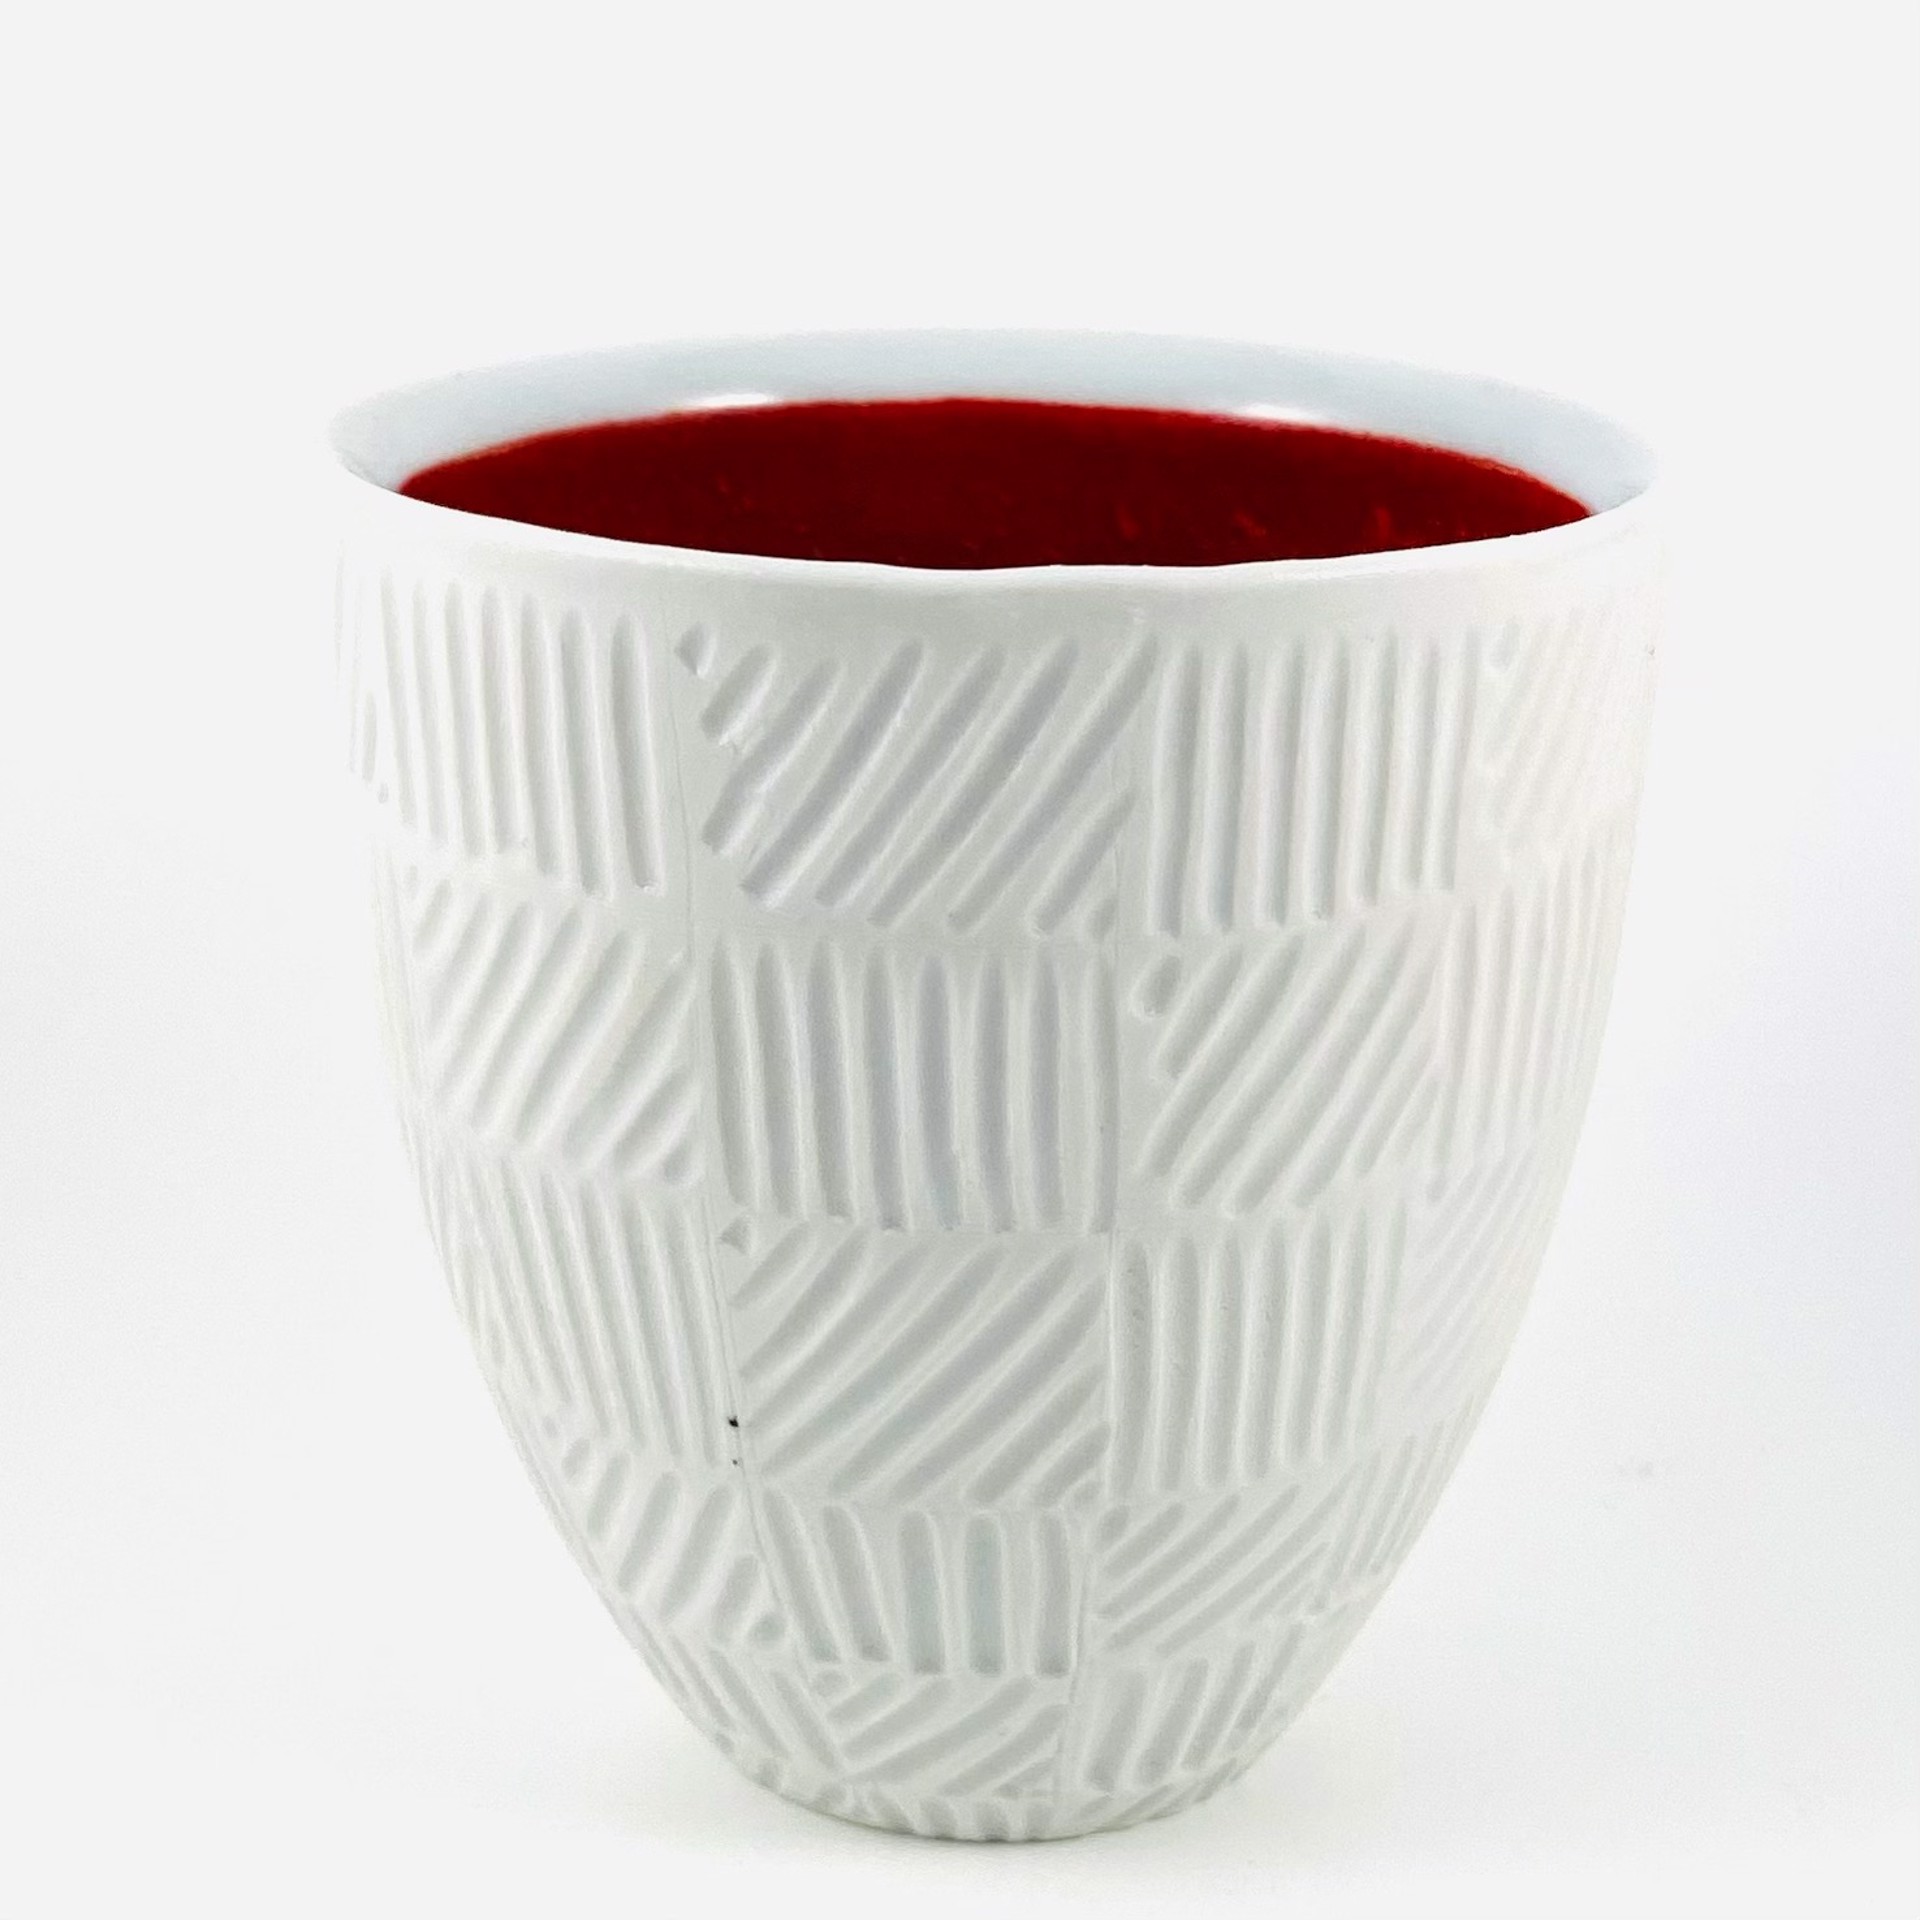 Textured Cup with Wine Red Glazed Interior AJ21-9 by Ann John